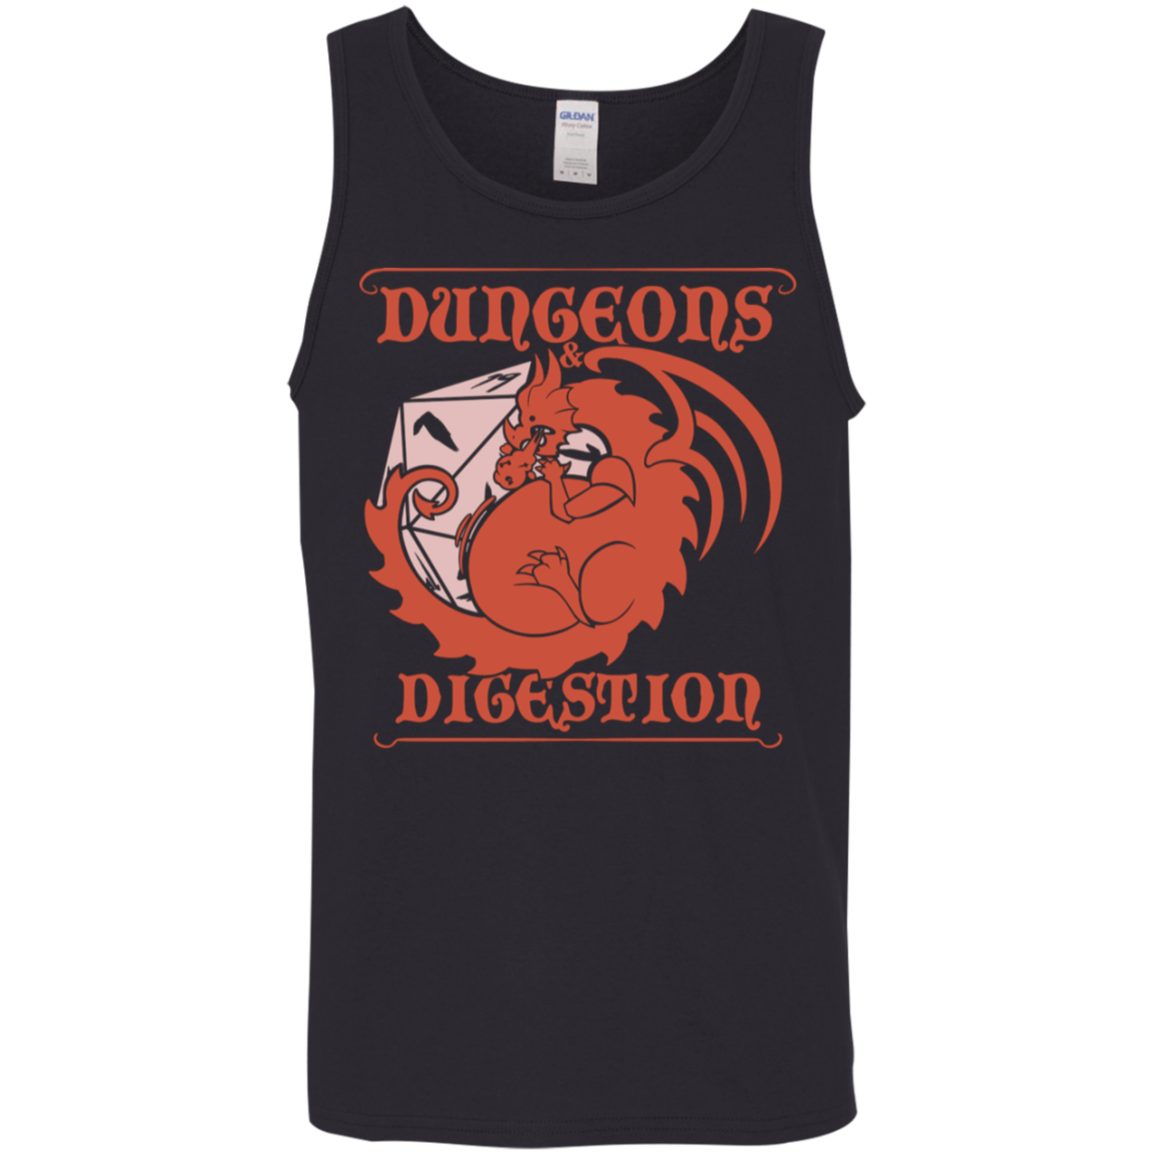 Dungeons & Digestion - Tank Top